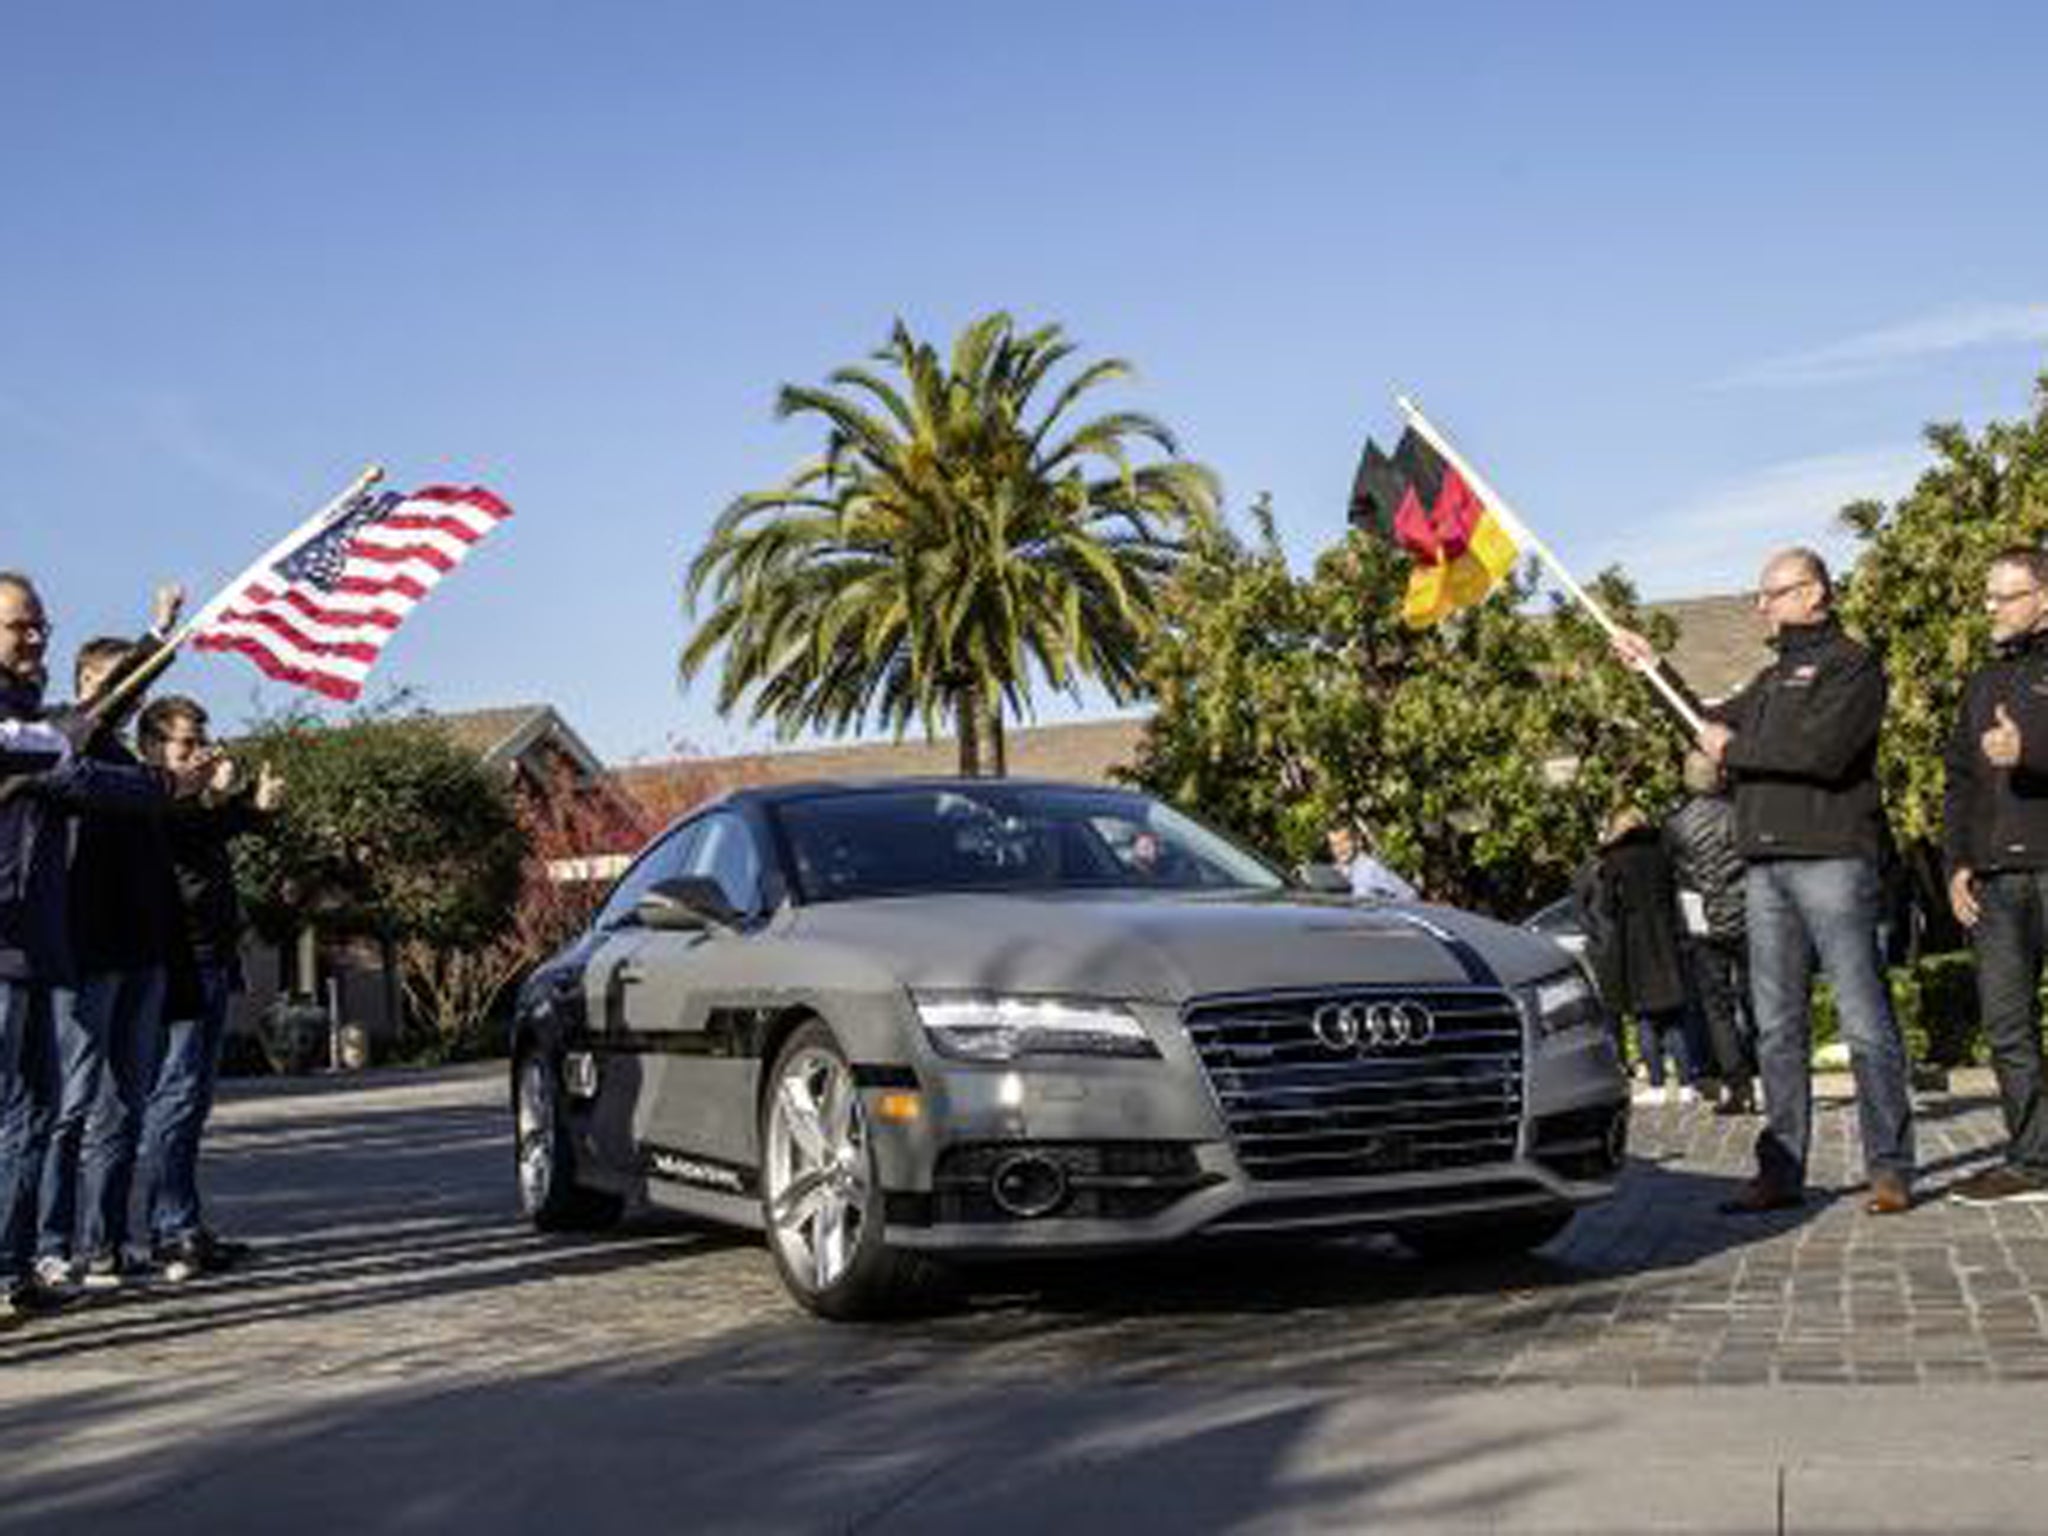 Audi's self-driving car is now on its way from California to Las Vegas, for the Consumer Electronics Show there